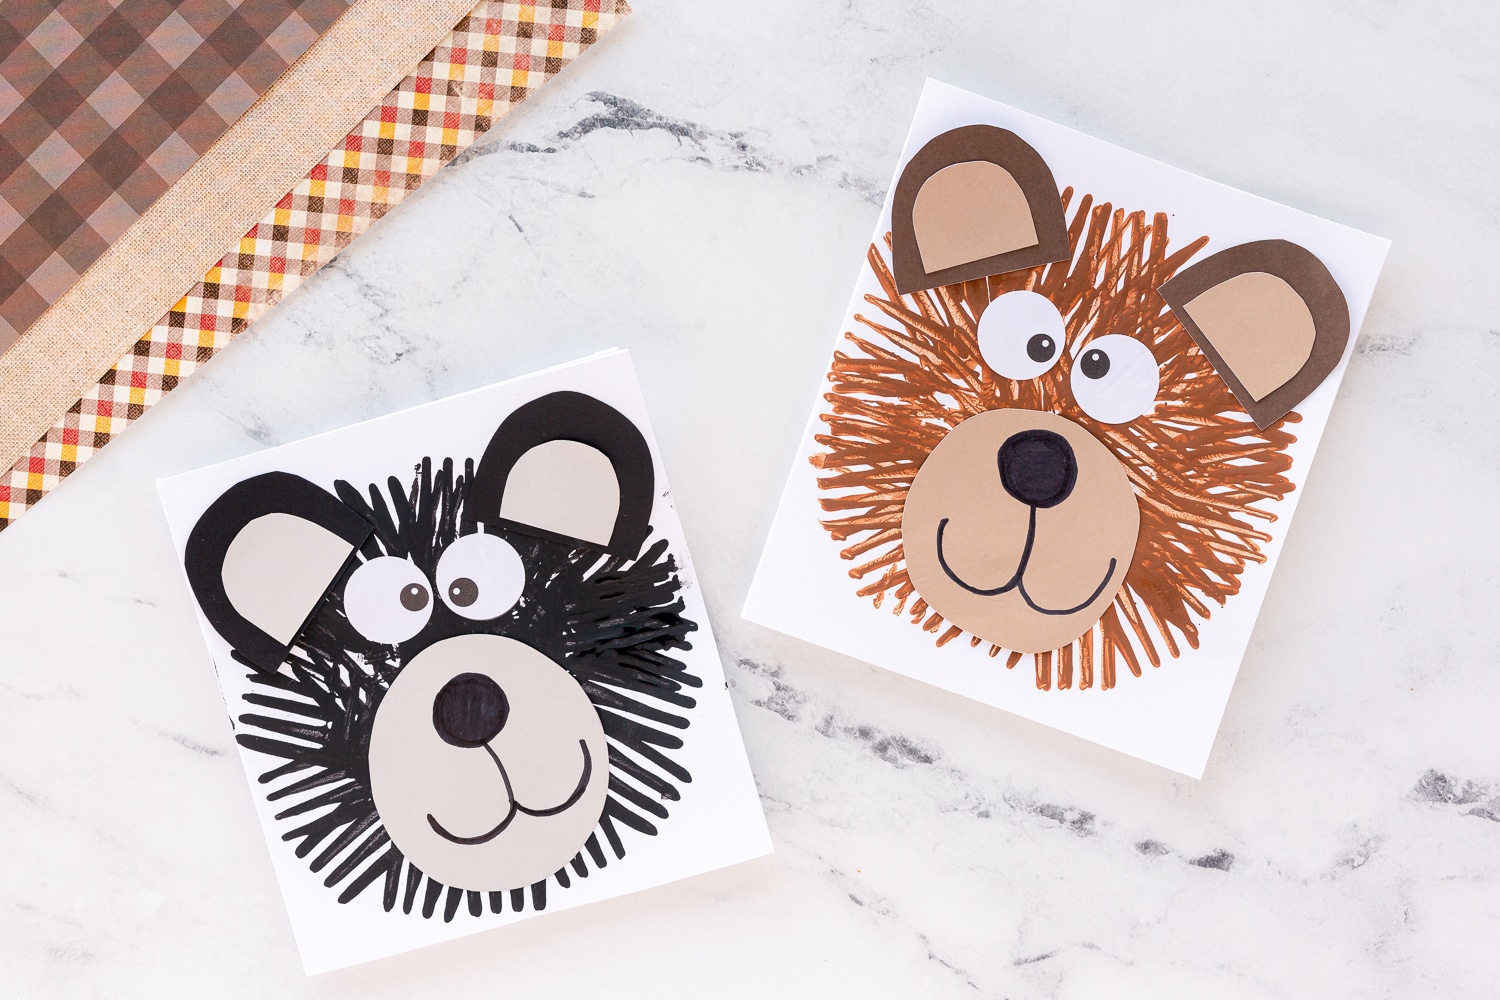 fork painted bear cards on counter